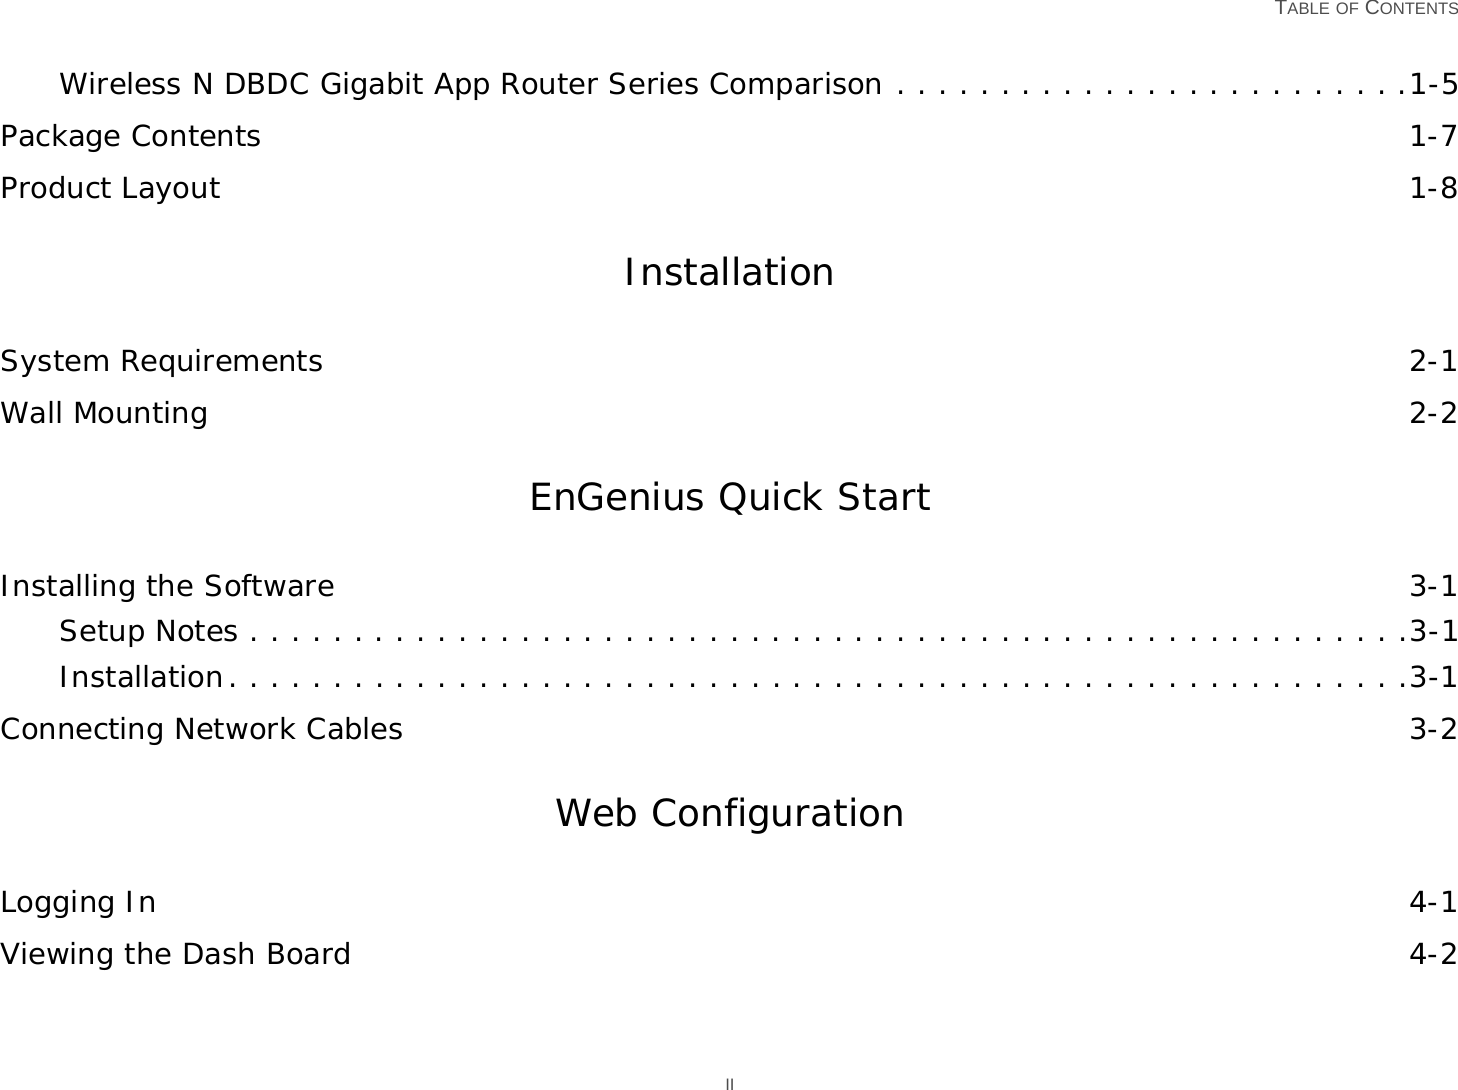   TABLE OF CONTENTS IIWireless N DBDC Gigabit App Router Series Comparison . . . . . . . . . . . . . . . . . . . . . . . . .1-5Package Contents 1-7Product Layout 1-8InstallationSystem Requirements 2-1Wall Mounting 2-2EnGenius Quick StartInstalling the Software 3-1Setup Notes . . . . . . . . . . . . . . . . . . . . . . . . . . . . . . . . . . . . . . . . . . . . . . . . . . . . . . . .3-1Installation. . . . . . . . . . . . . . . . . . . . . . . . . . . . . . . . . . . . . . . . . . . . . . . . . . . . . . . . .3-1Connecting Network Cables 3-2Web ConfigurationLogging In 4-1Viewing the Dash Board 4-2